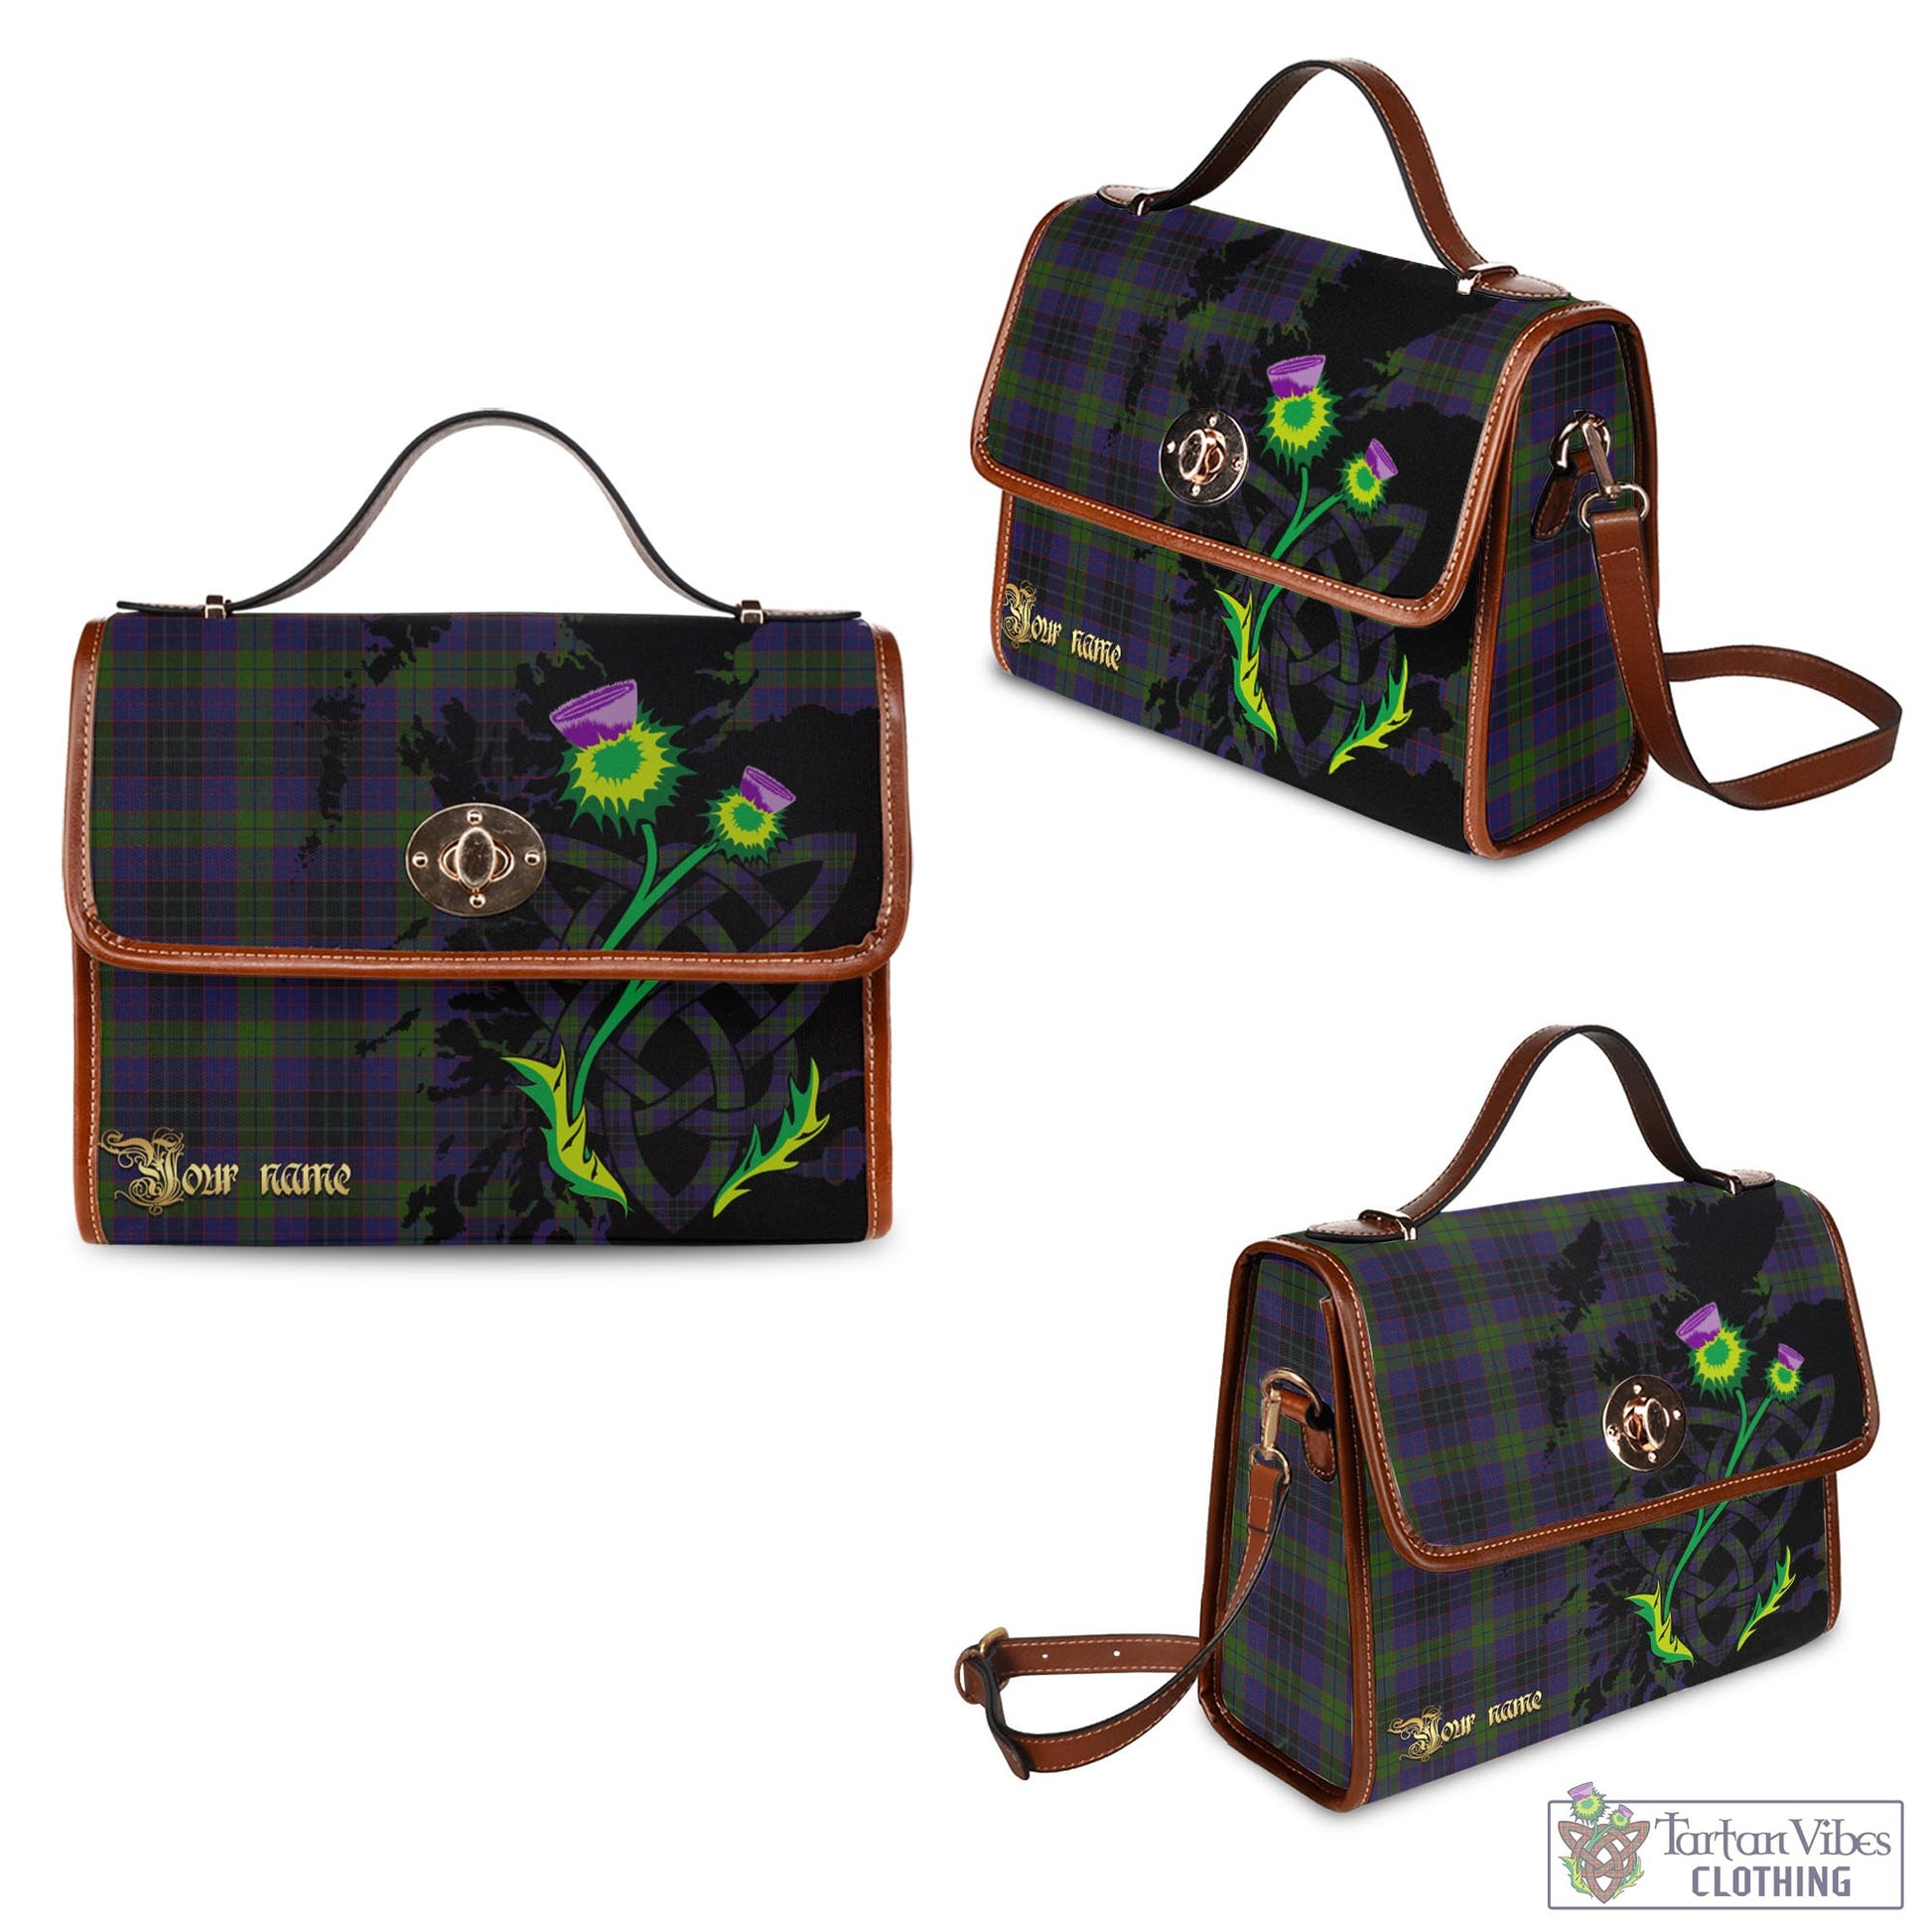 Tartan Vibes Clothing Lumsden Hunting Tartan Waterproof Canvas Bag with Scotland Map and Thistle Celtic Accents